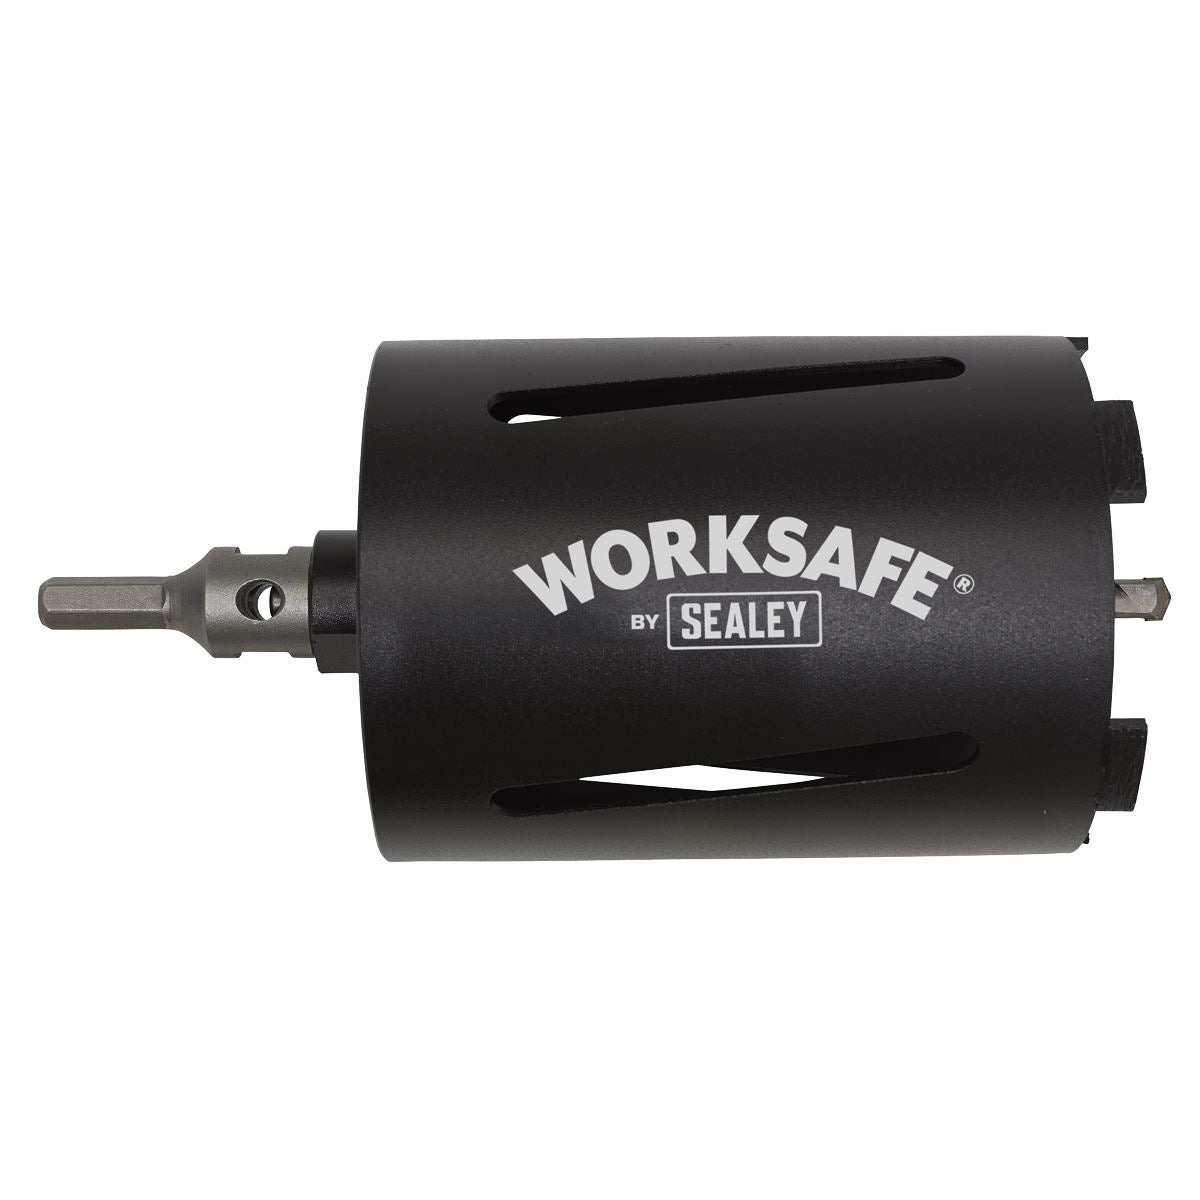 Worksafe by Sealey Core-to-Go Dry Diamond Core Drill Ø117mm x 150mm